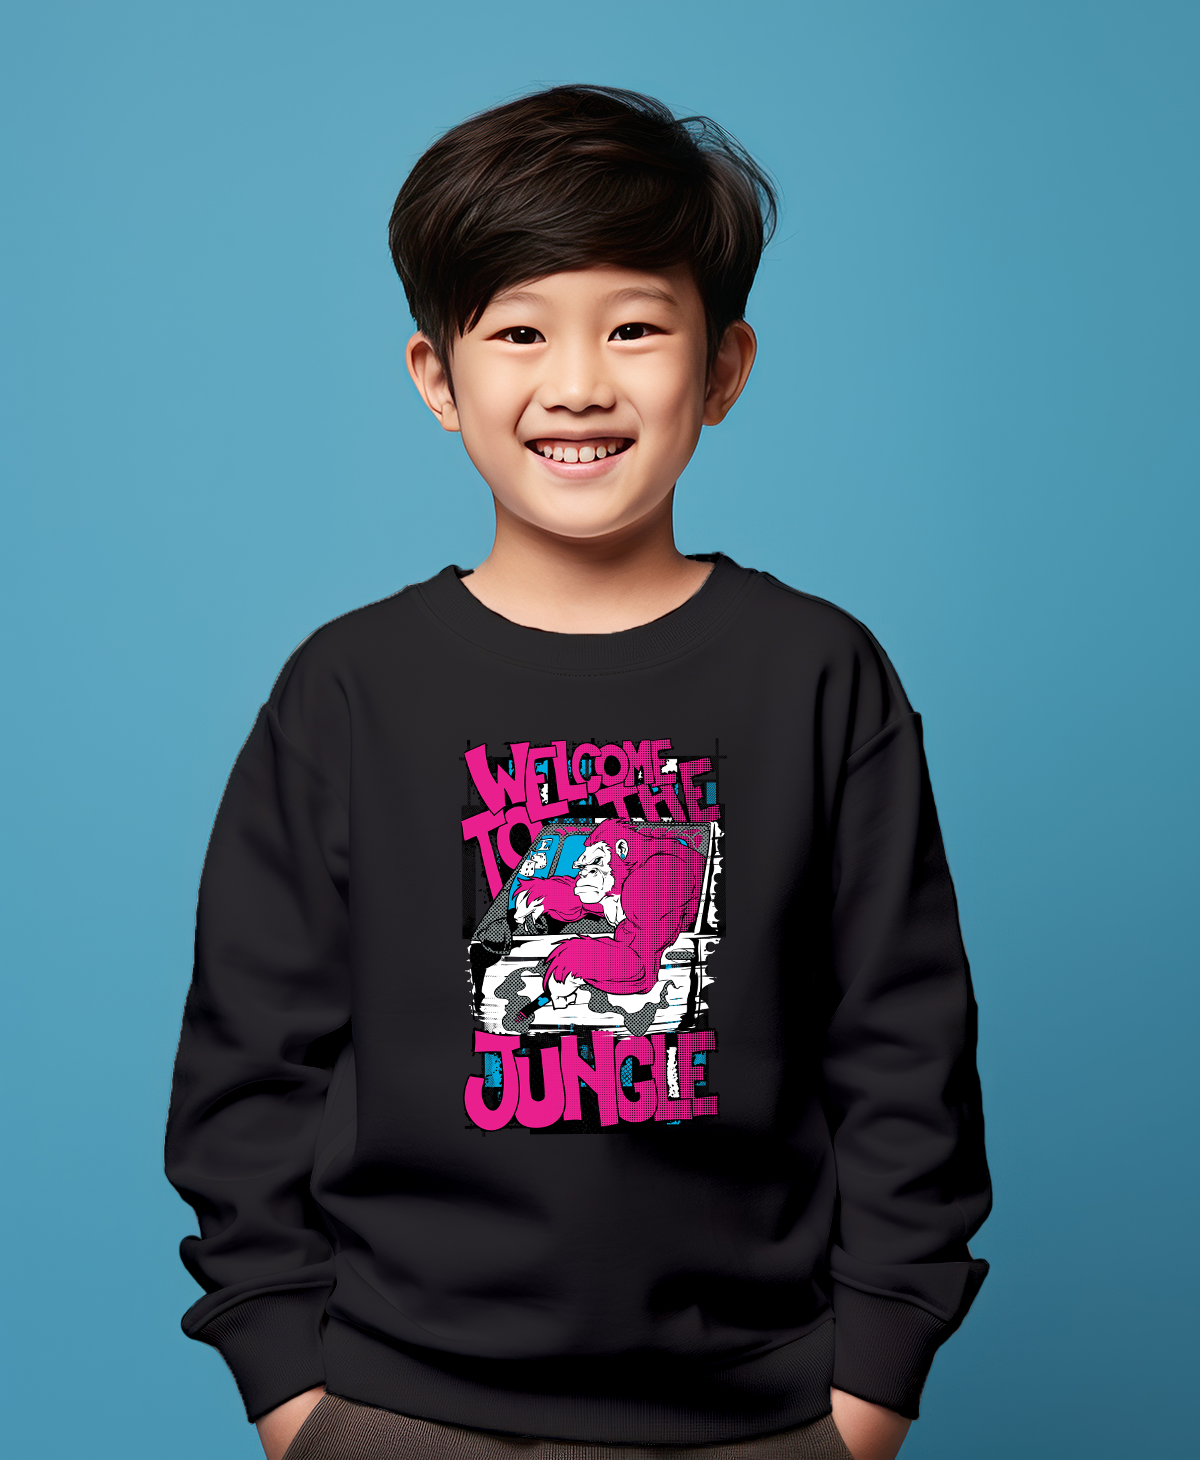 Welcome to the jungle black sweatshirt for boys & girls